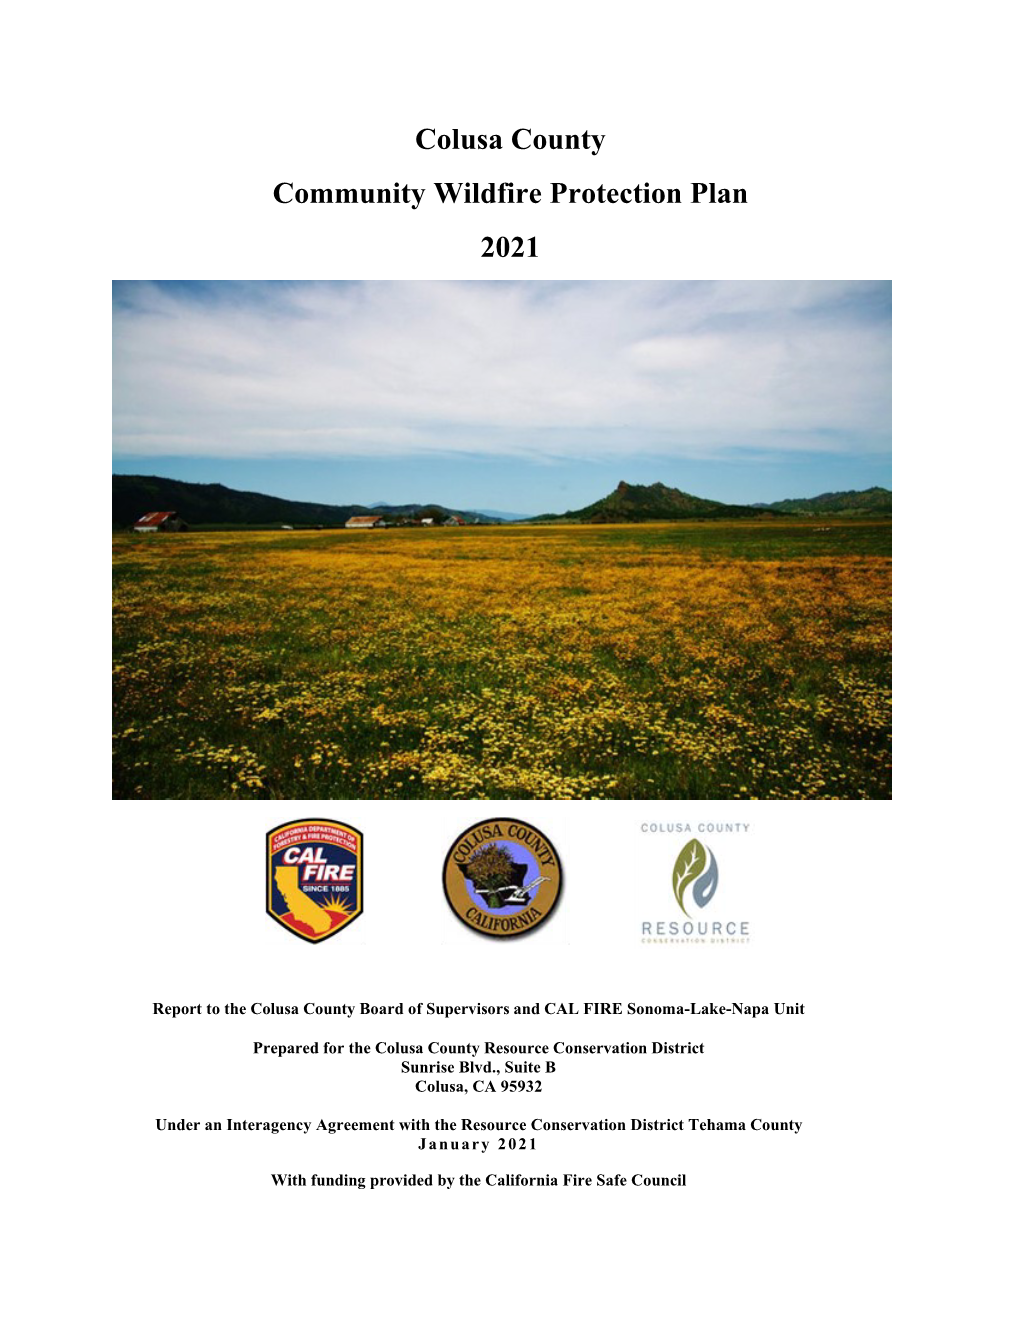 Colusa County Community Wildfire Protection Plan 2021